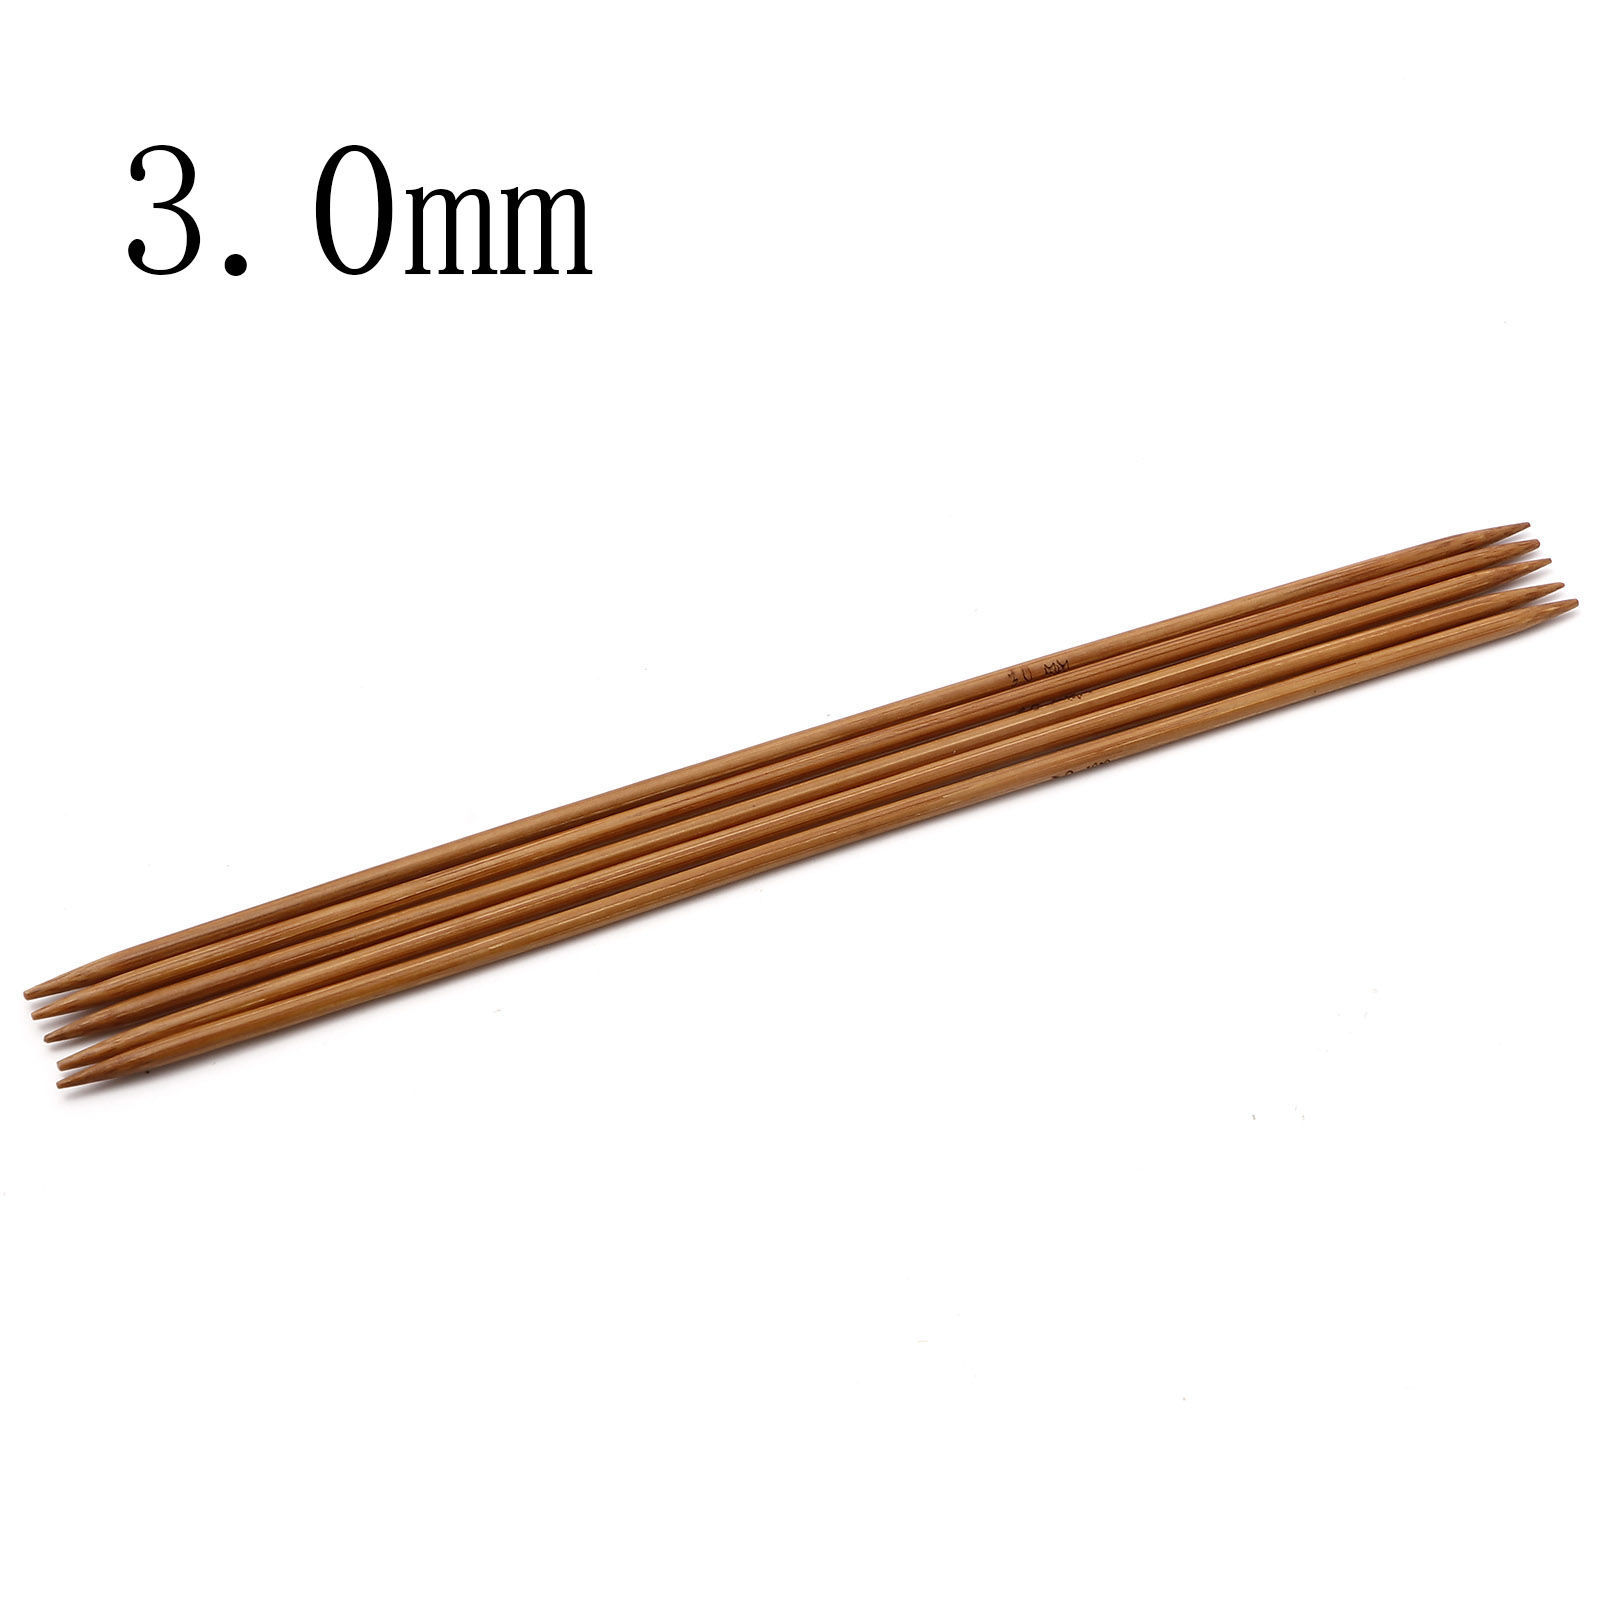 Picture of 3mm Bamboo Double Pointed Knitting Needles Brown 20cm(7 7/8") long, 5 PCs